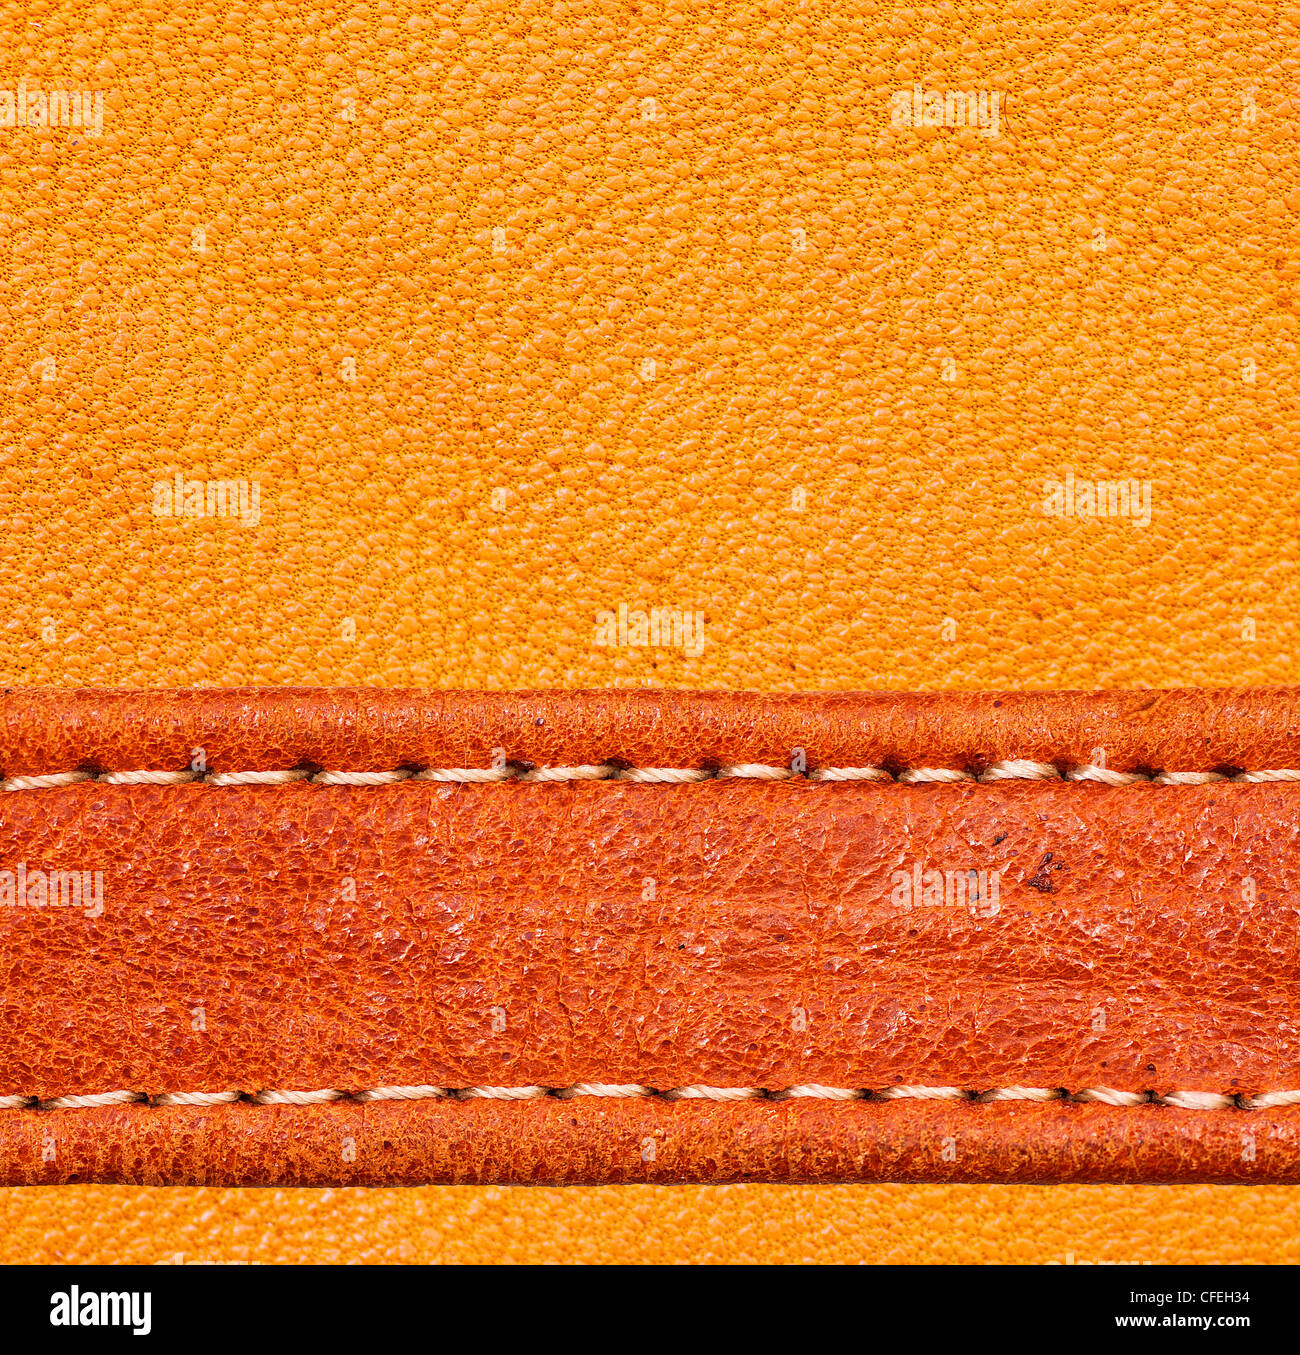 A brown leather texture. high resolution. Stock Photo